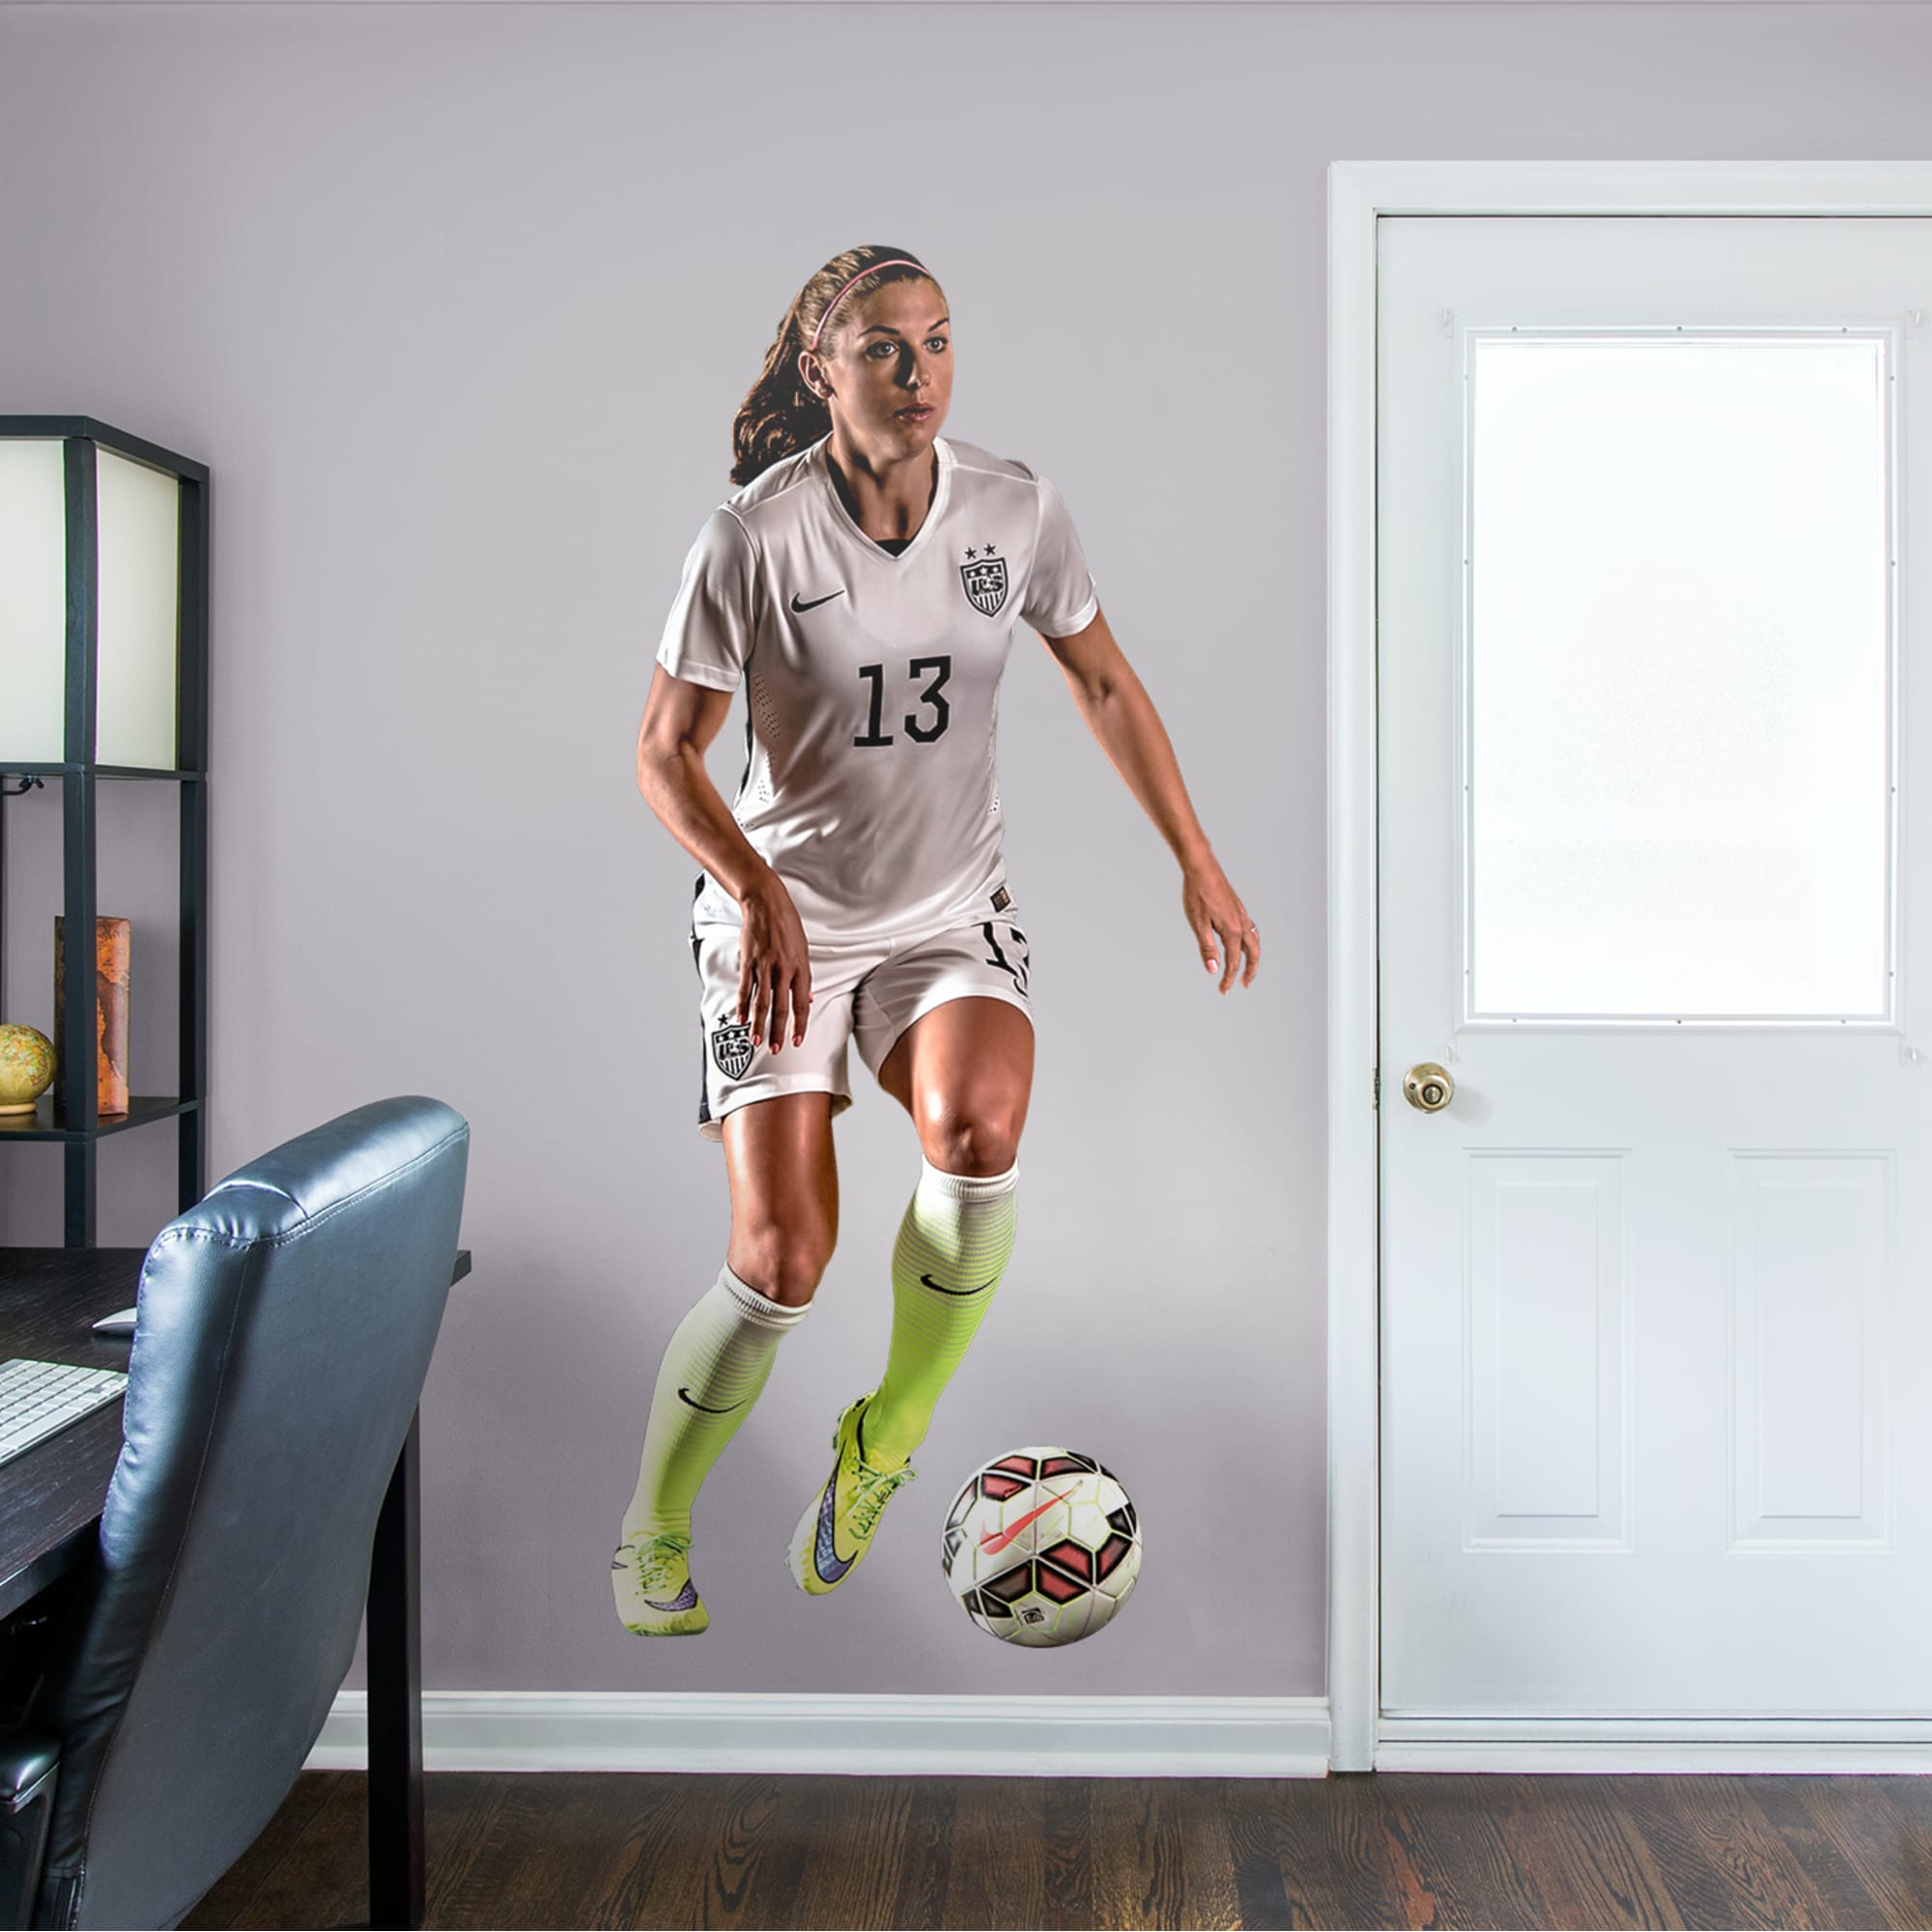 Alex Morgan for USWNT, Women in Sports: Forward - Officially Licensed Removable Wall Decal by Fathead | Vinyl